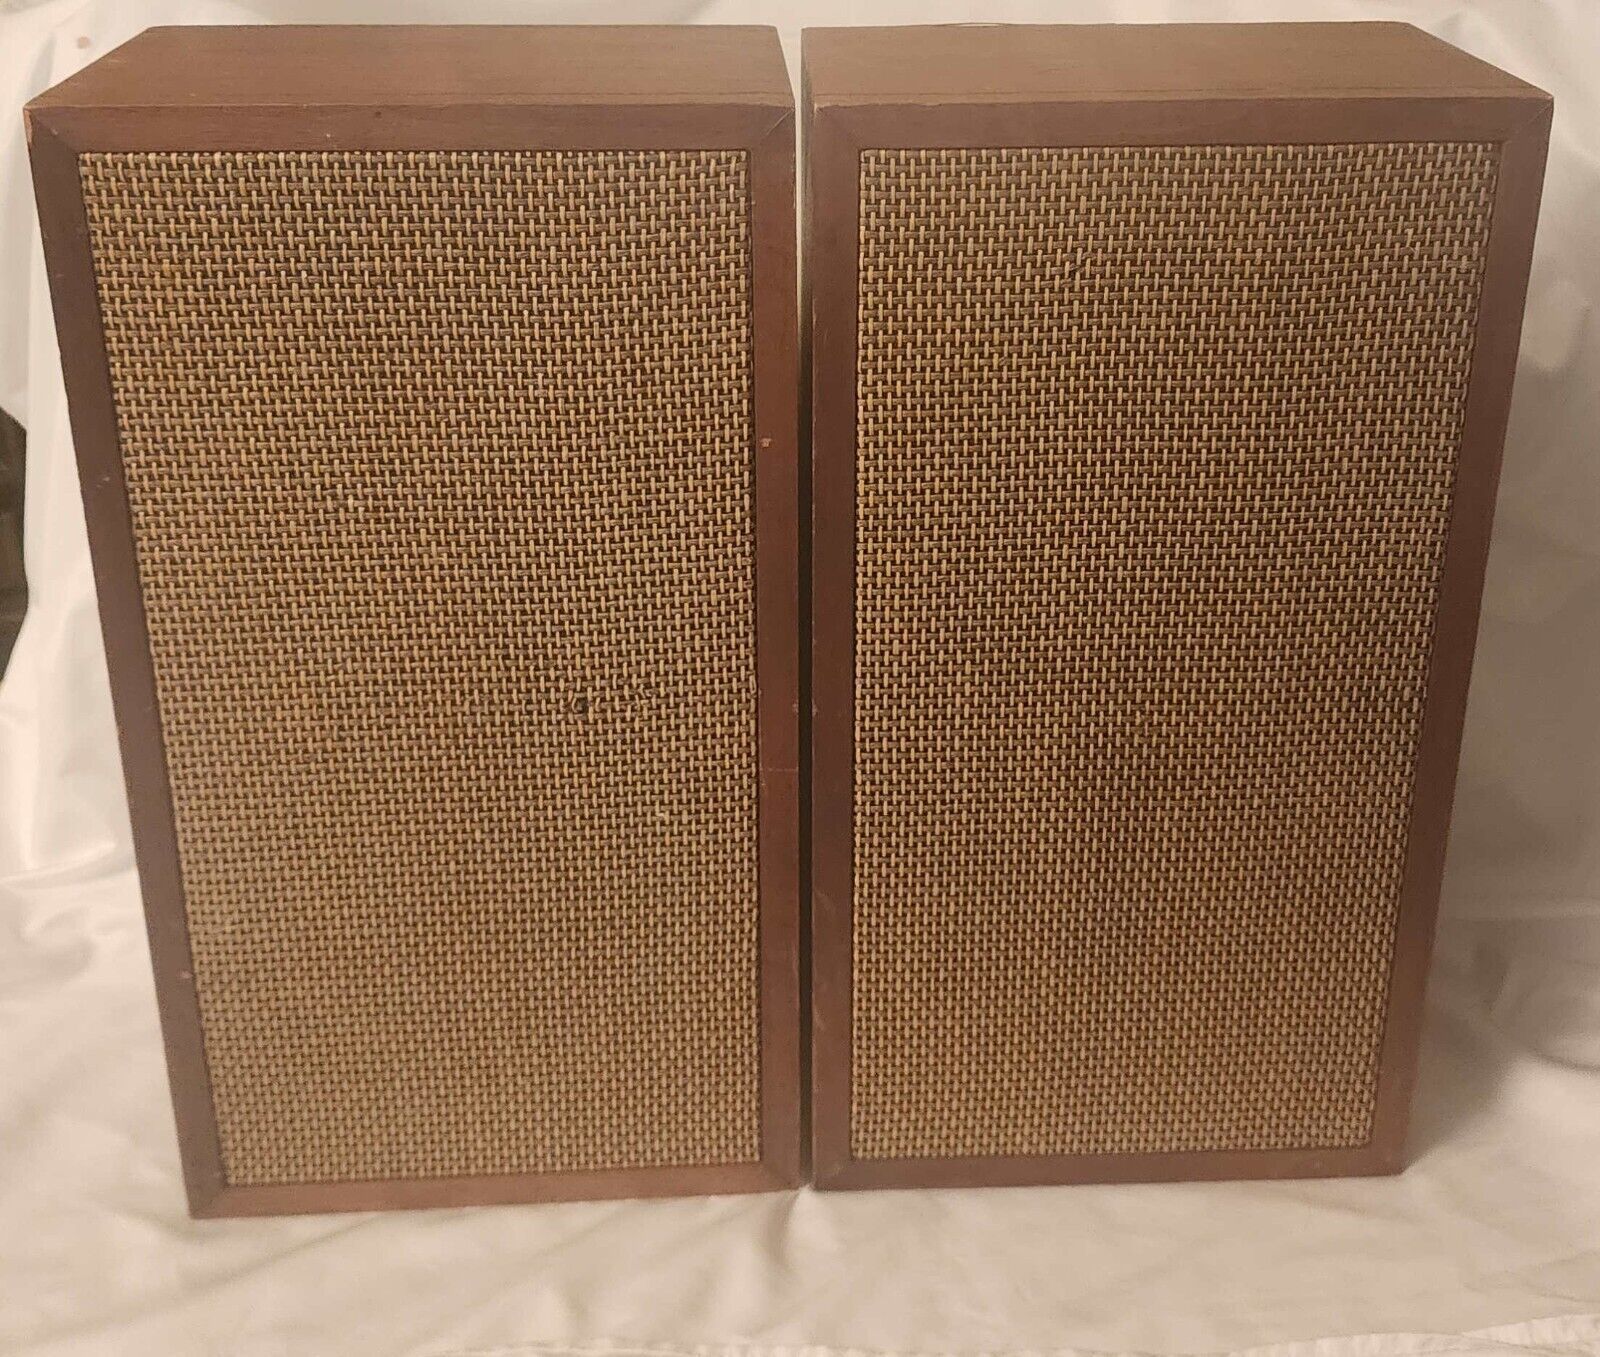 Primary image for Allied Radio Knight KN-3005 Floor Speakers 22" Oiled Walnut Cabinet 3-Way